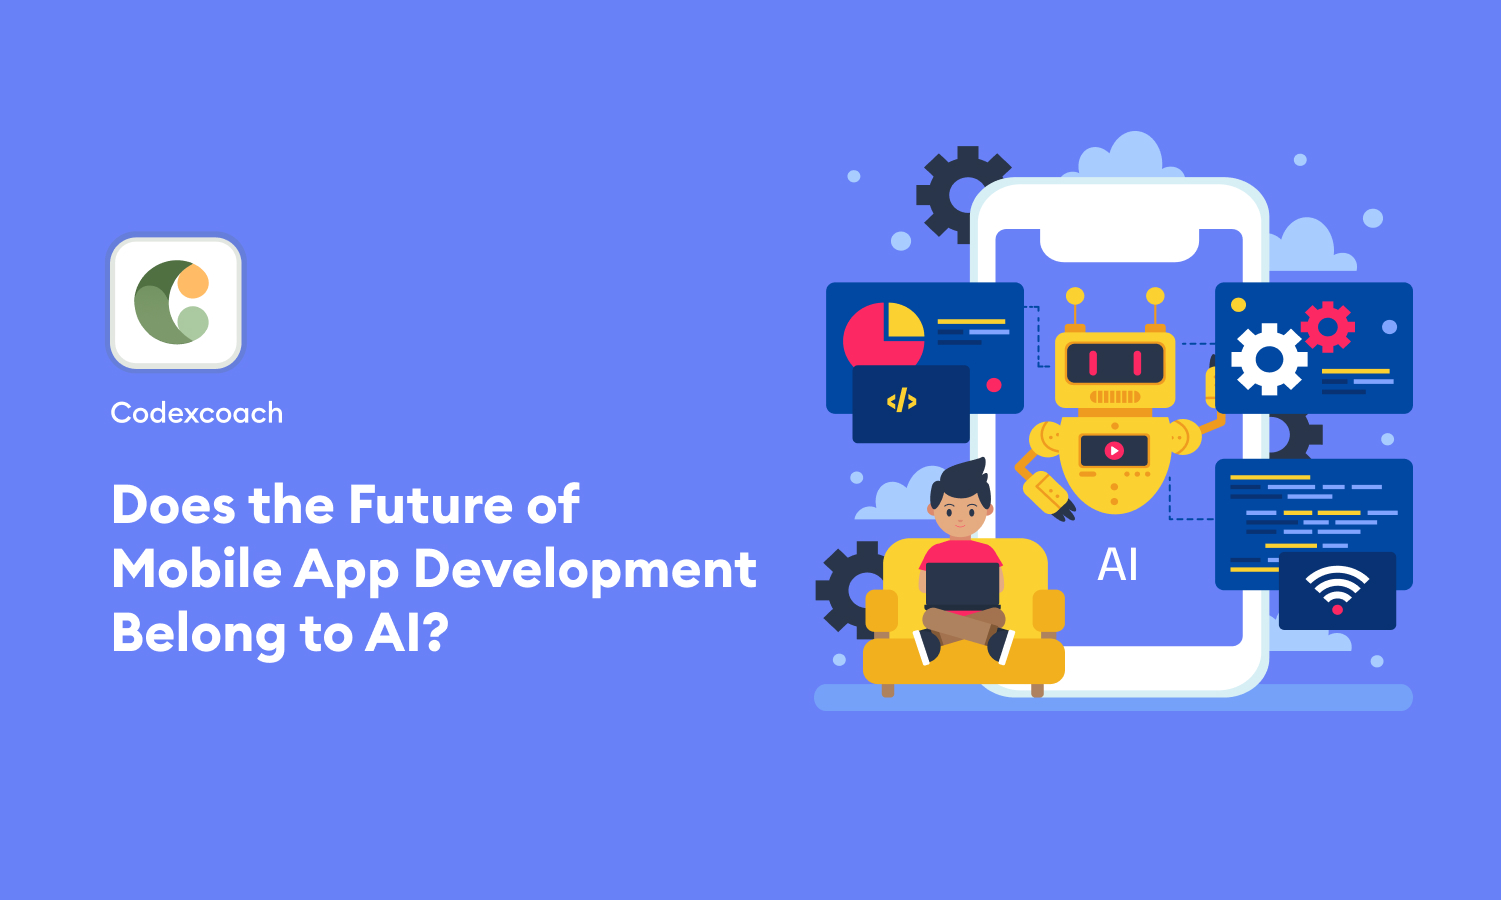 Does the Future of Mobile App Development Belong to AI